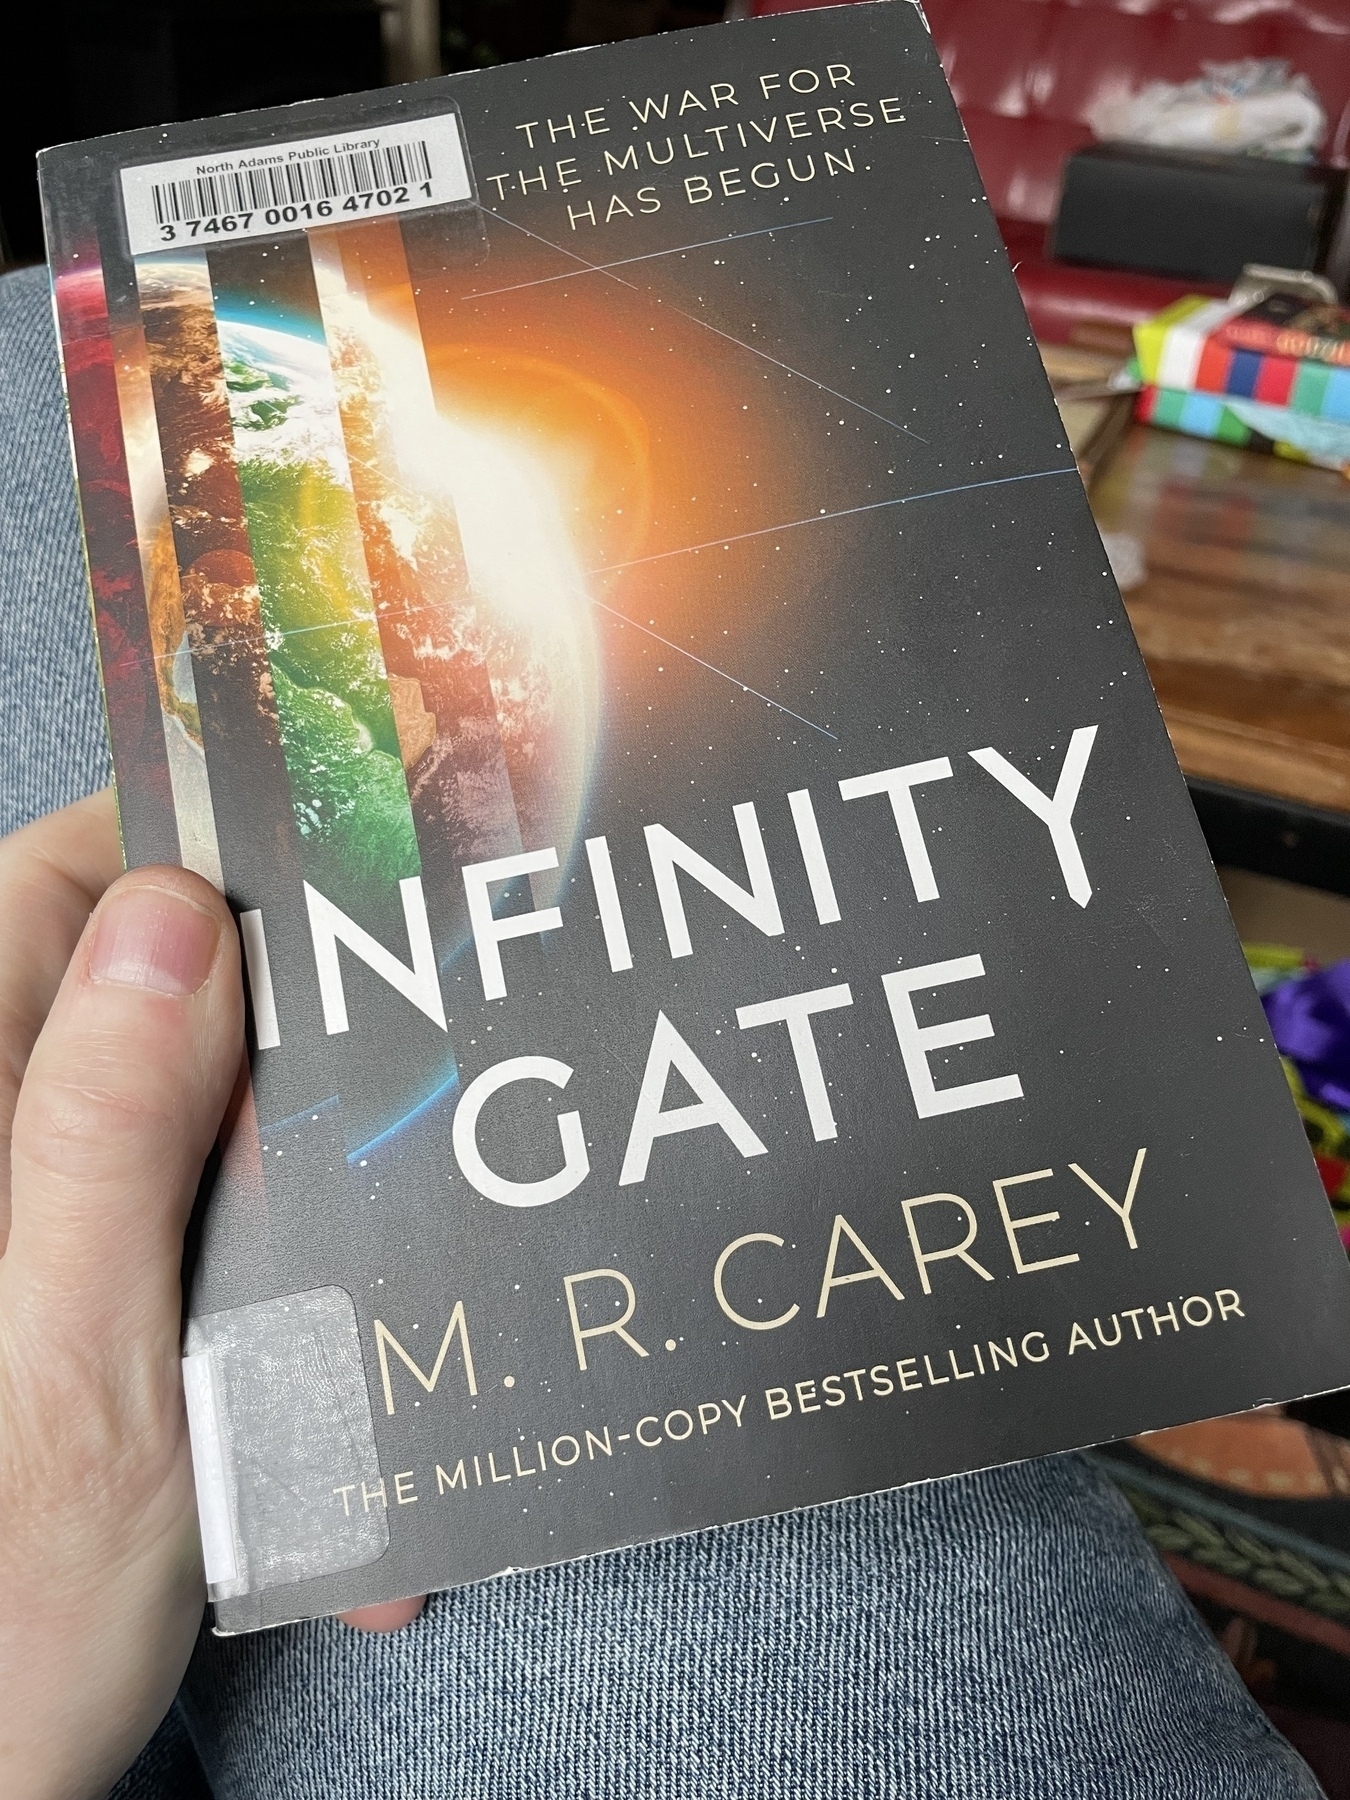 A physical copy of the book Infinity Gate by M.R. Carey